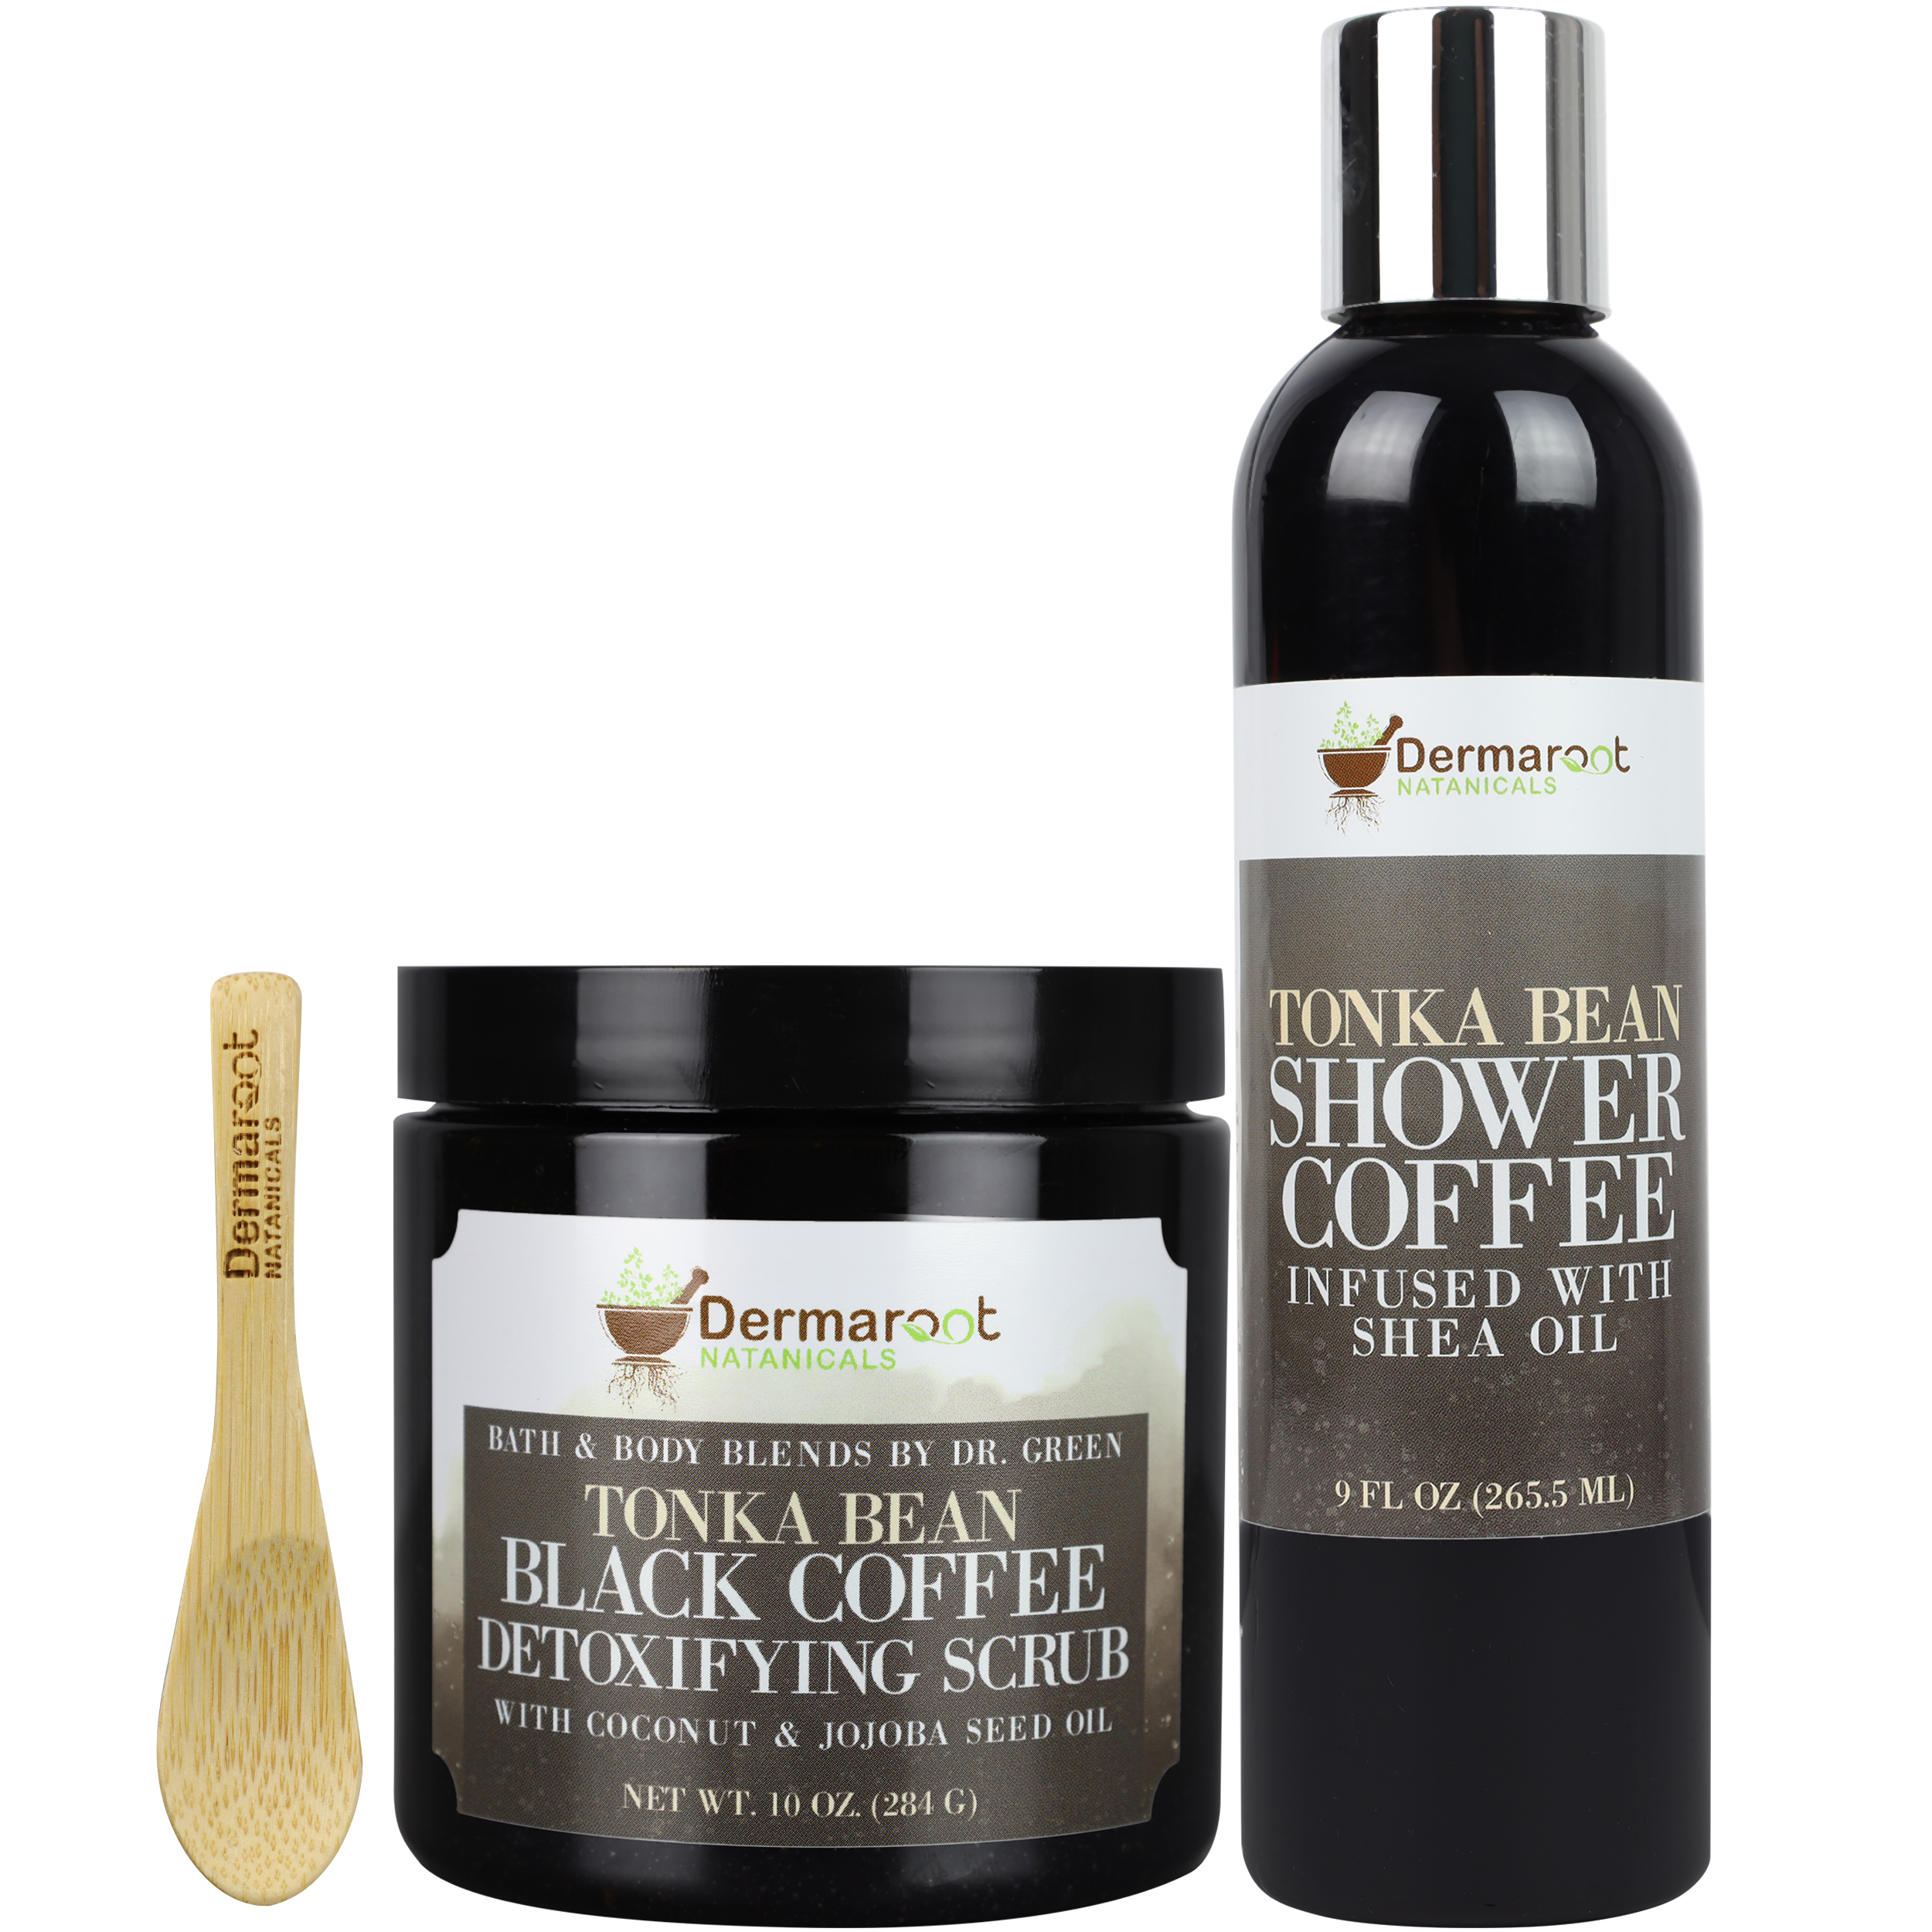 Bath & Body Blends by Dr. Green: Tonka Bean Shower Coffee Infused with Shea  Oil - Dermaroot Natanicals